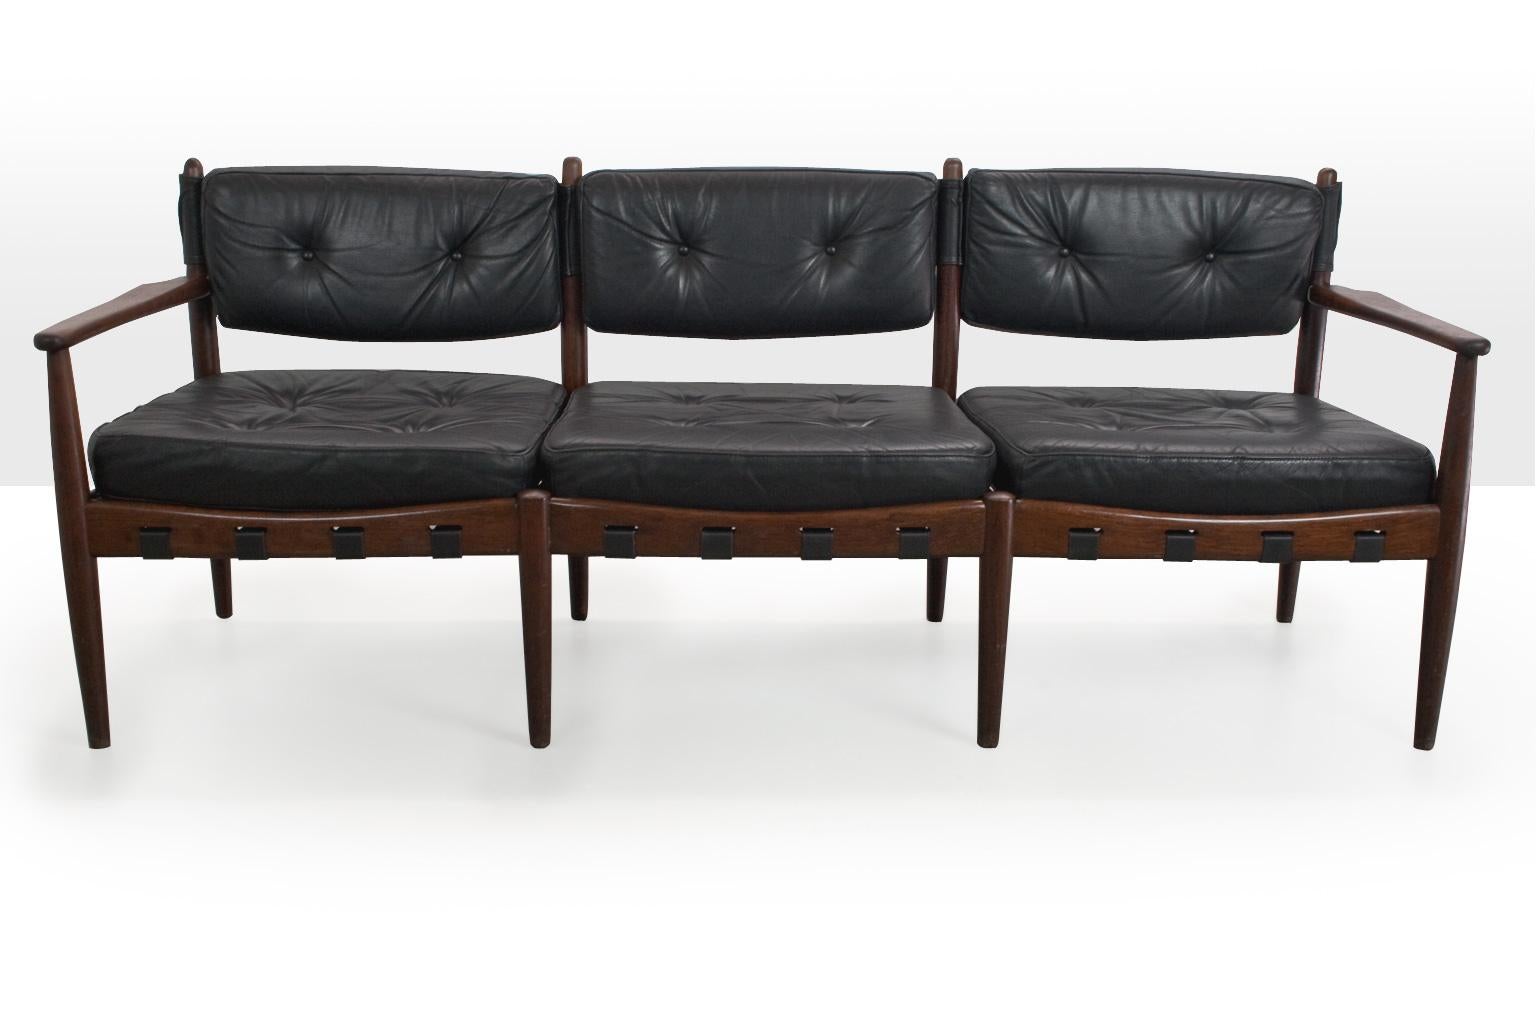 A three-seat Scandinavian modern sofa by Eric Merthen for Swedish IRE AB Skyllingaryd. This Brazilian inspired sofa features a frame of solid teak and padded black leather cushions. The webbing under the seats is renewed, the comfort and leather is